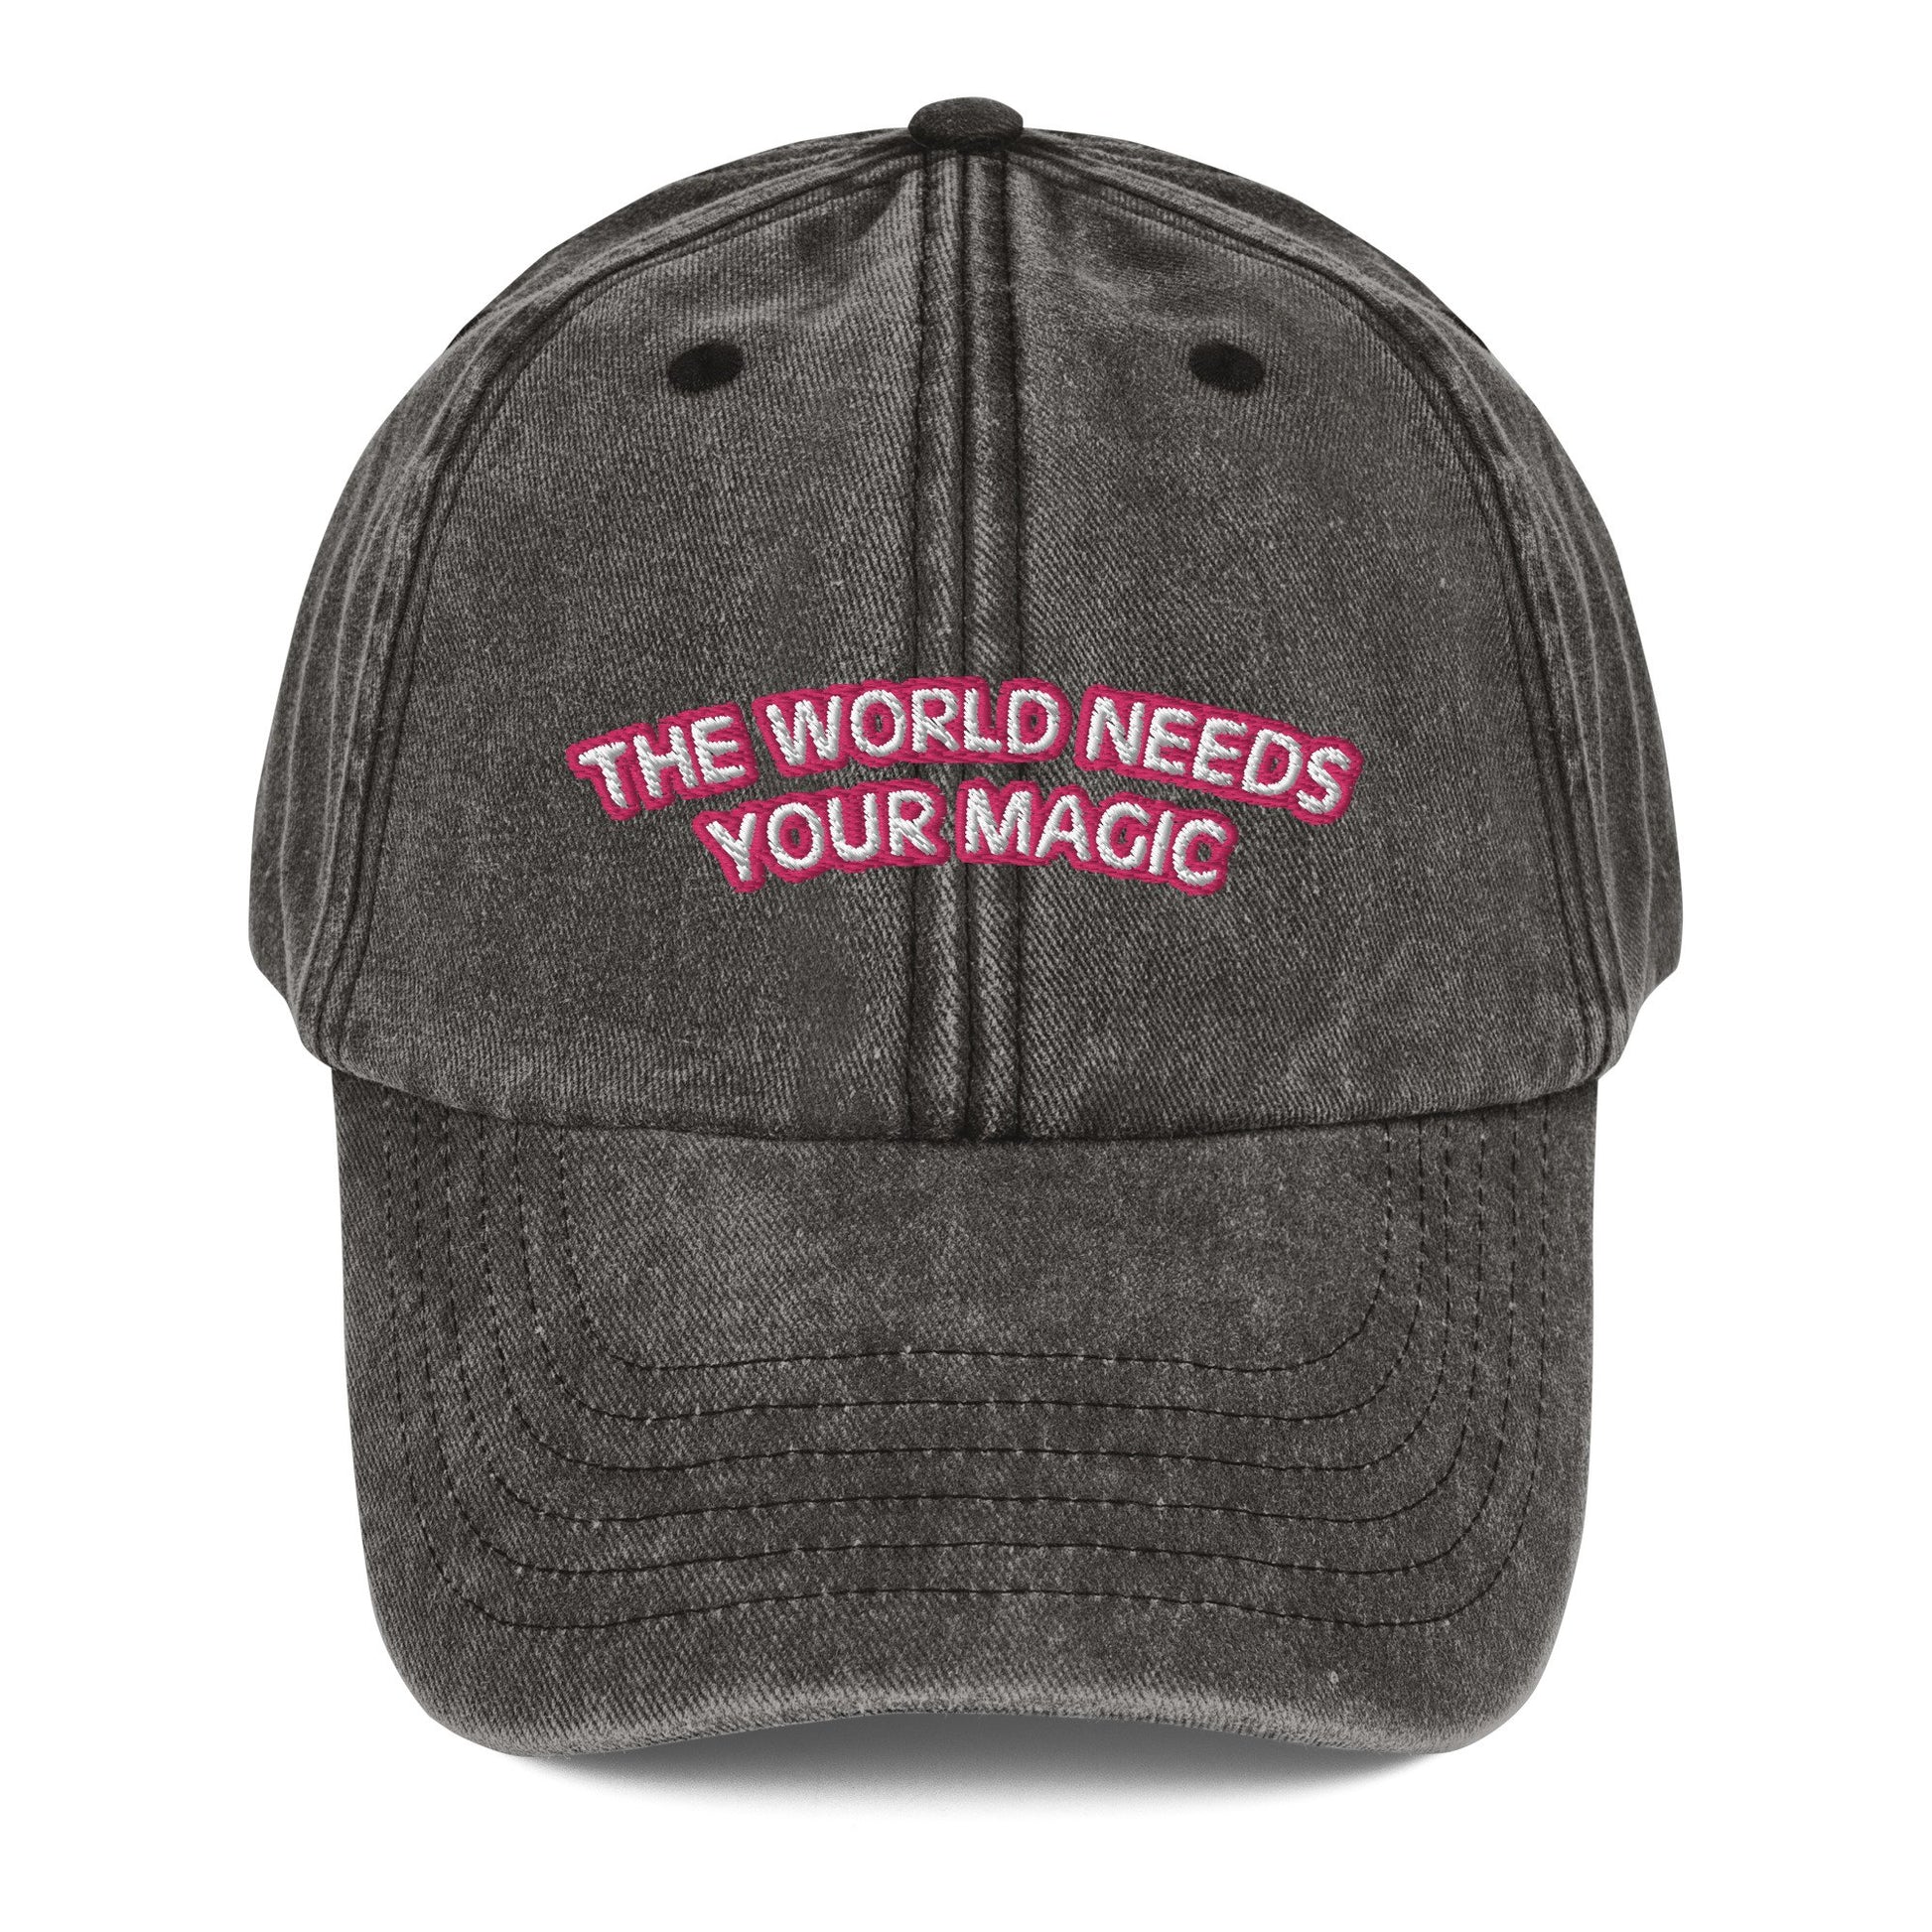 The World Needs Your Magic - Vintage Hat